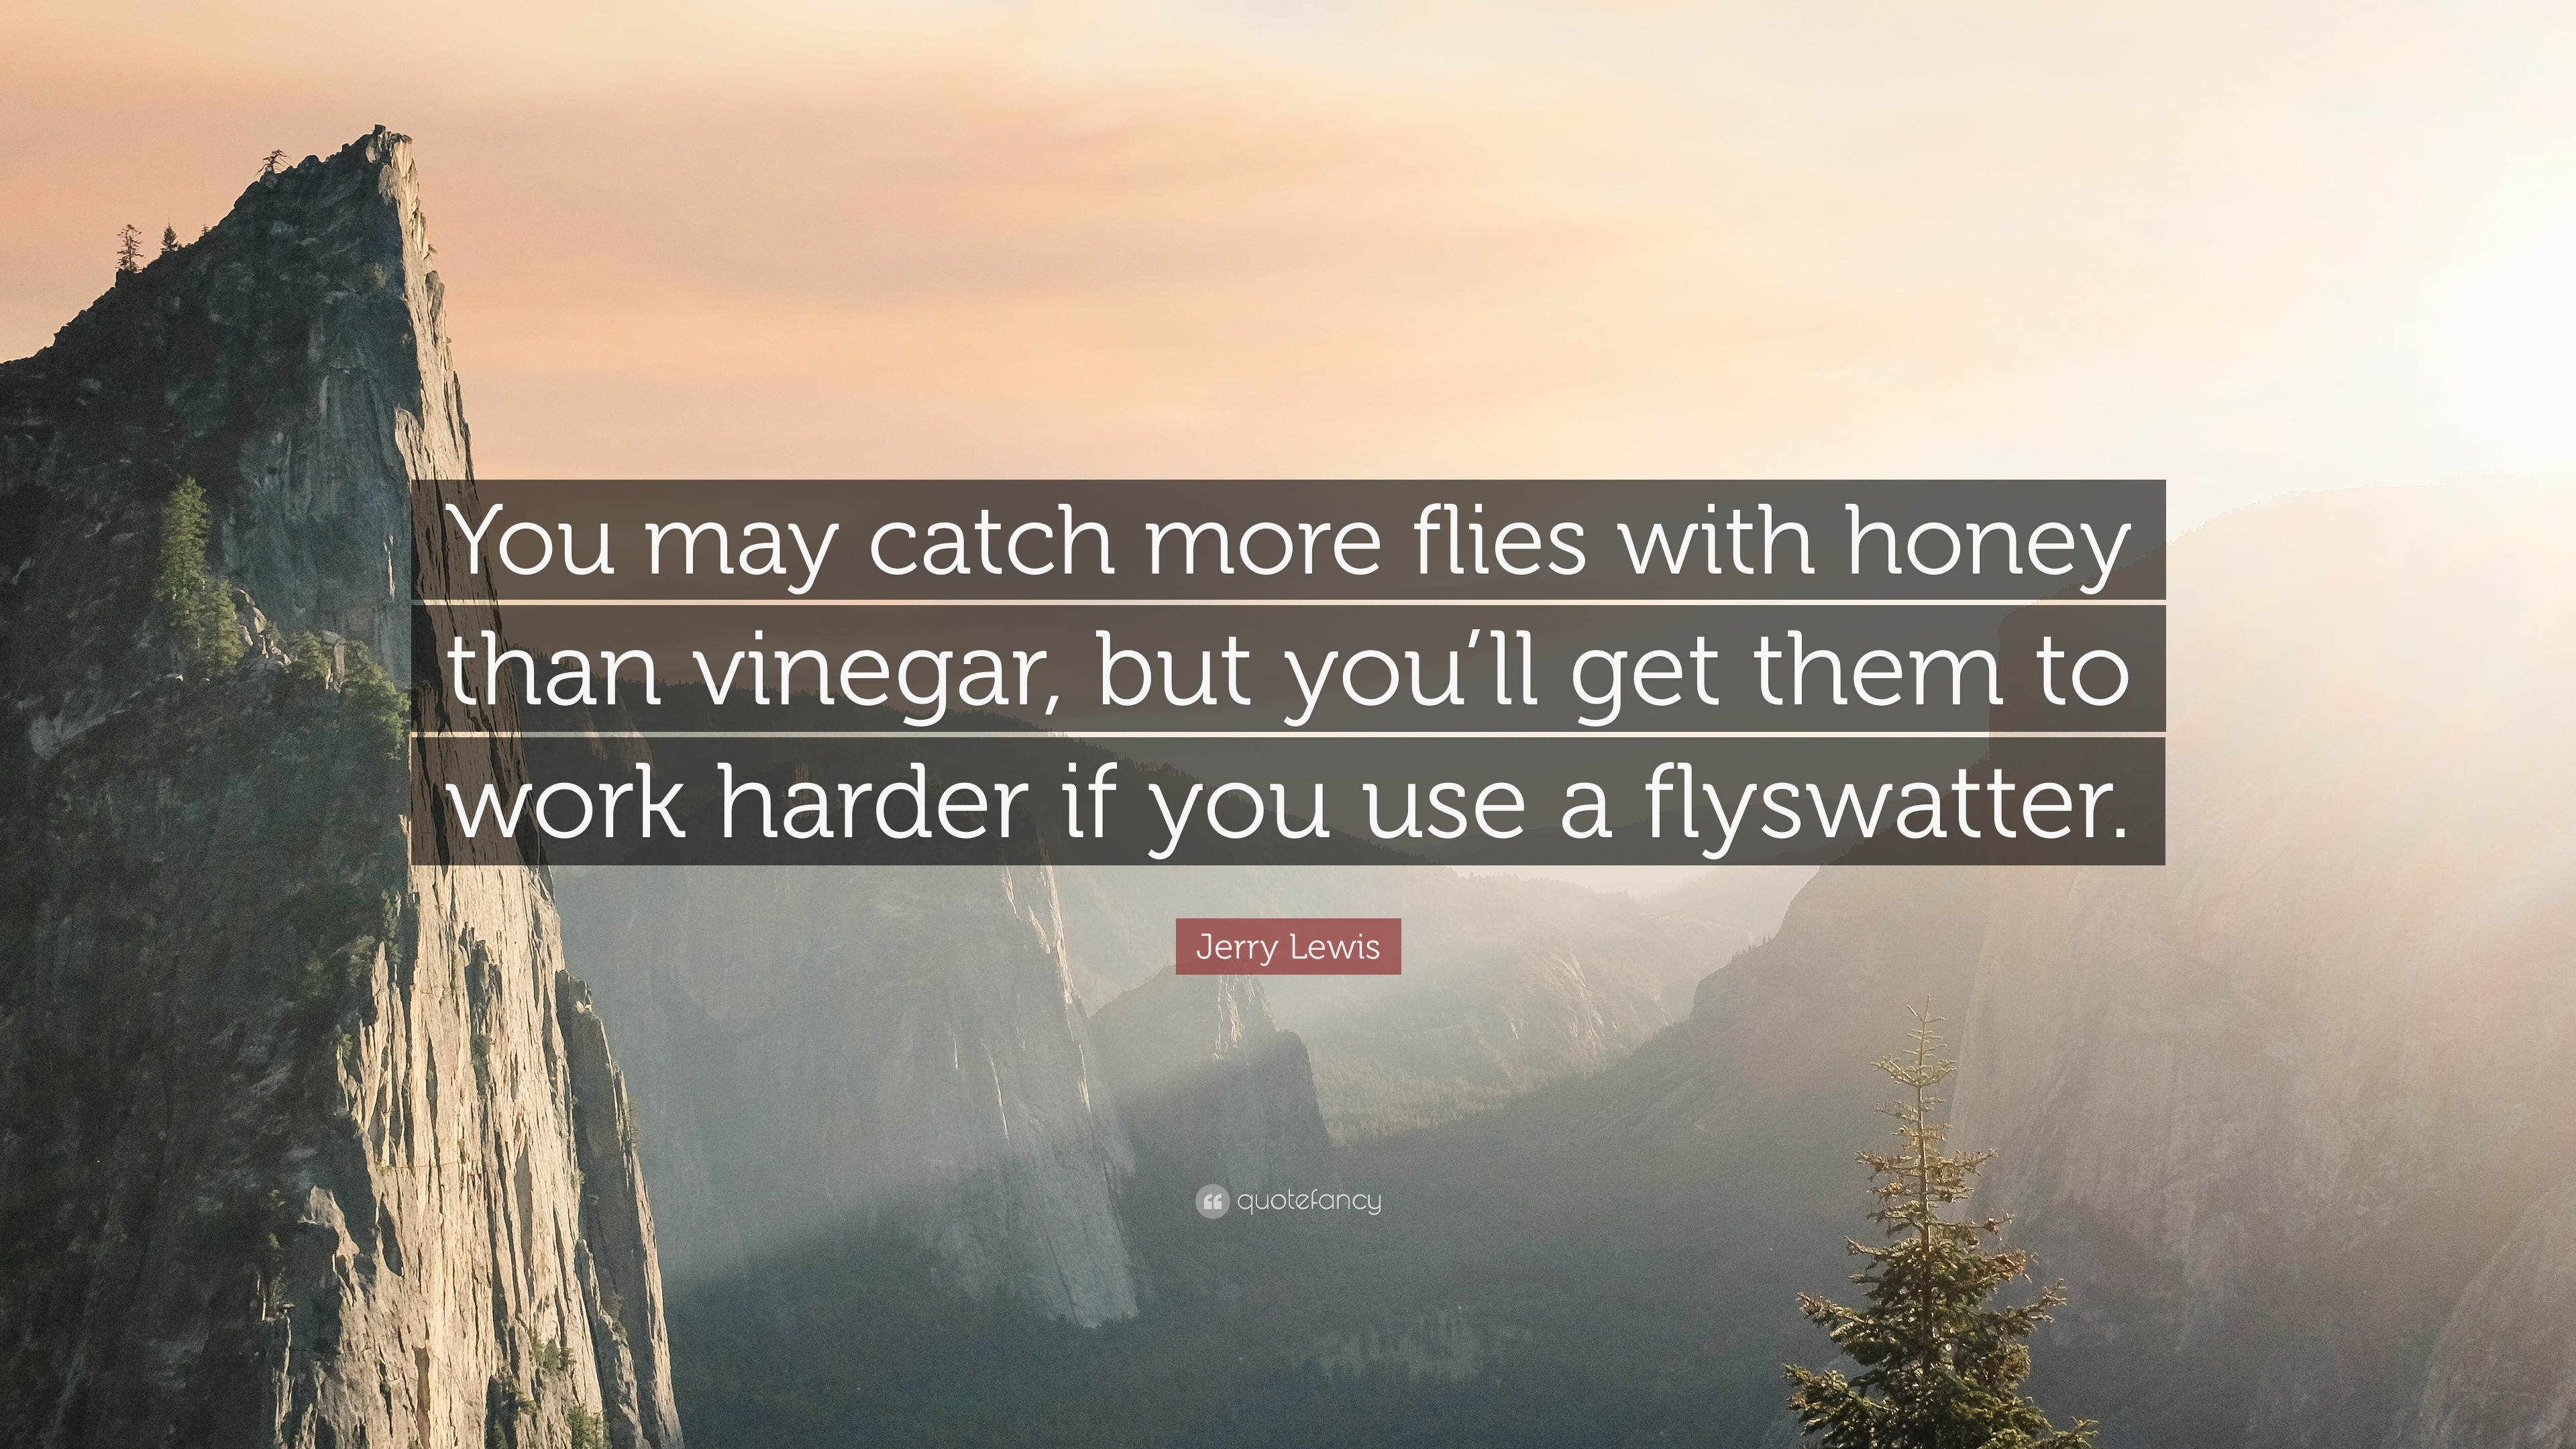 Jerry Lewis Quote “you May Catch More Flies With Honey Than Vinegar But Youll Get Them To